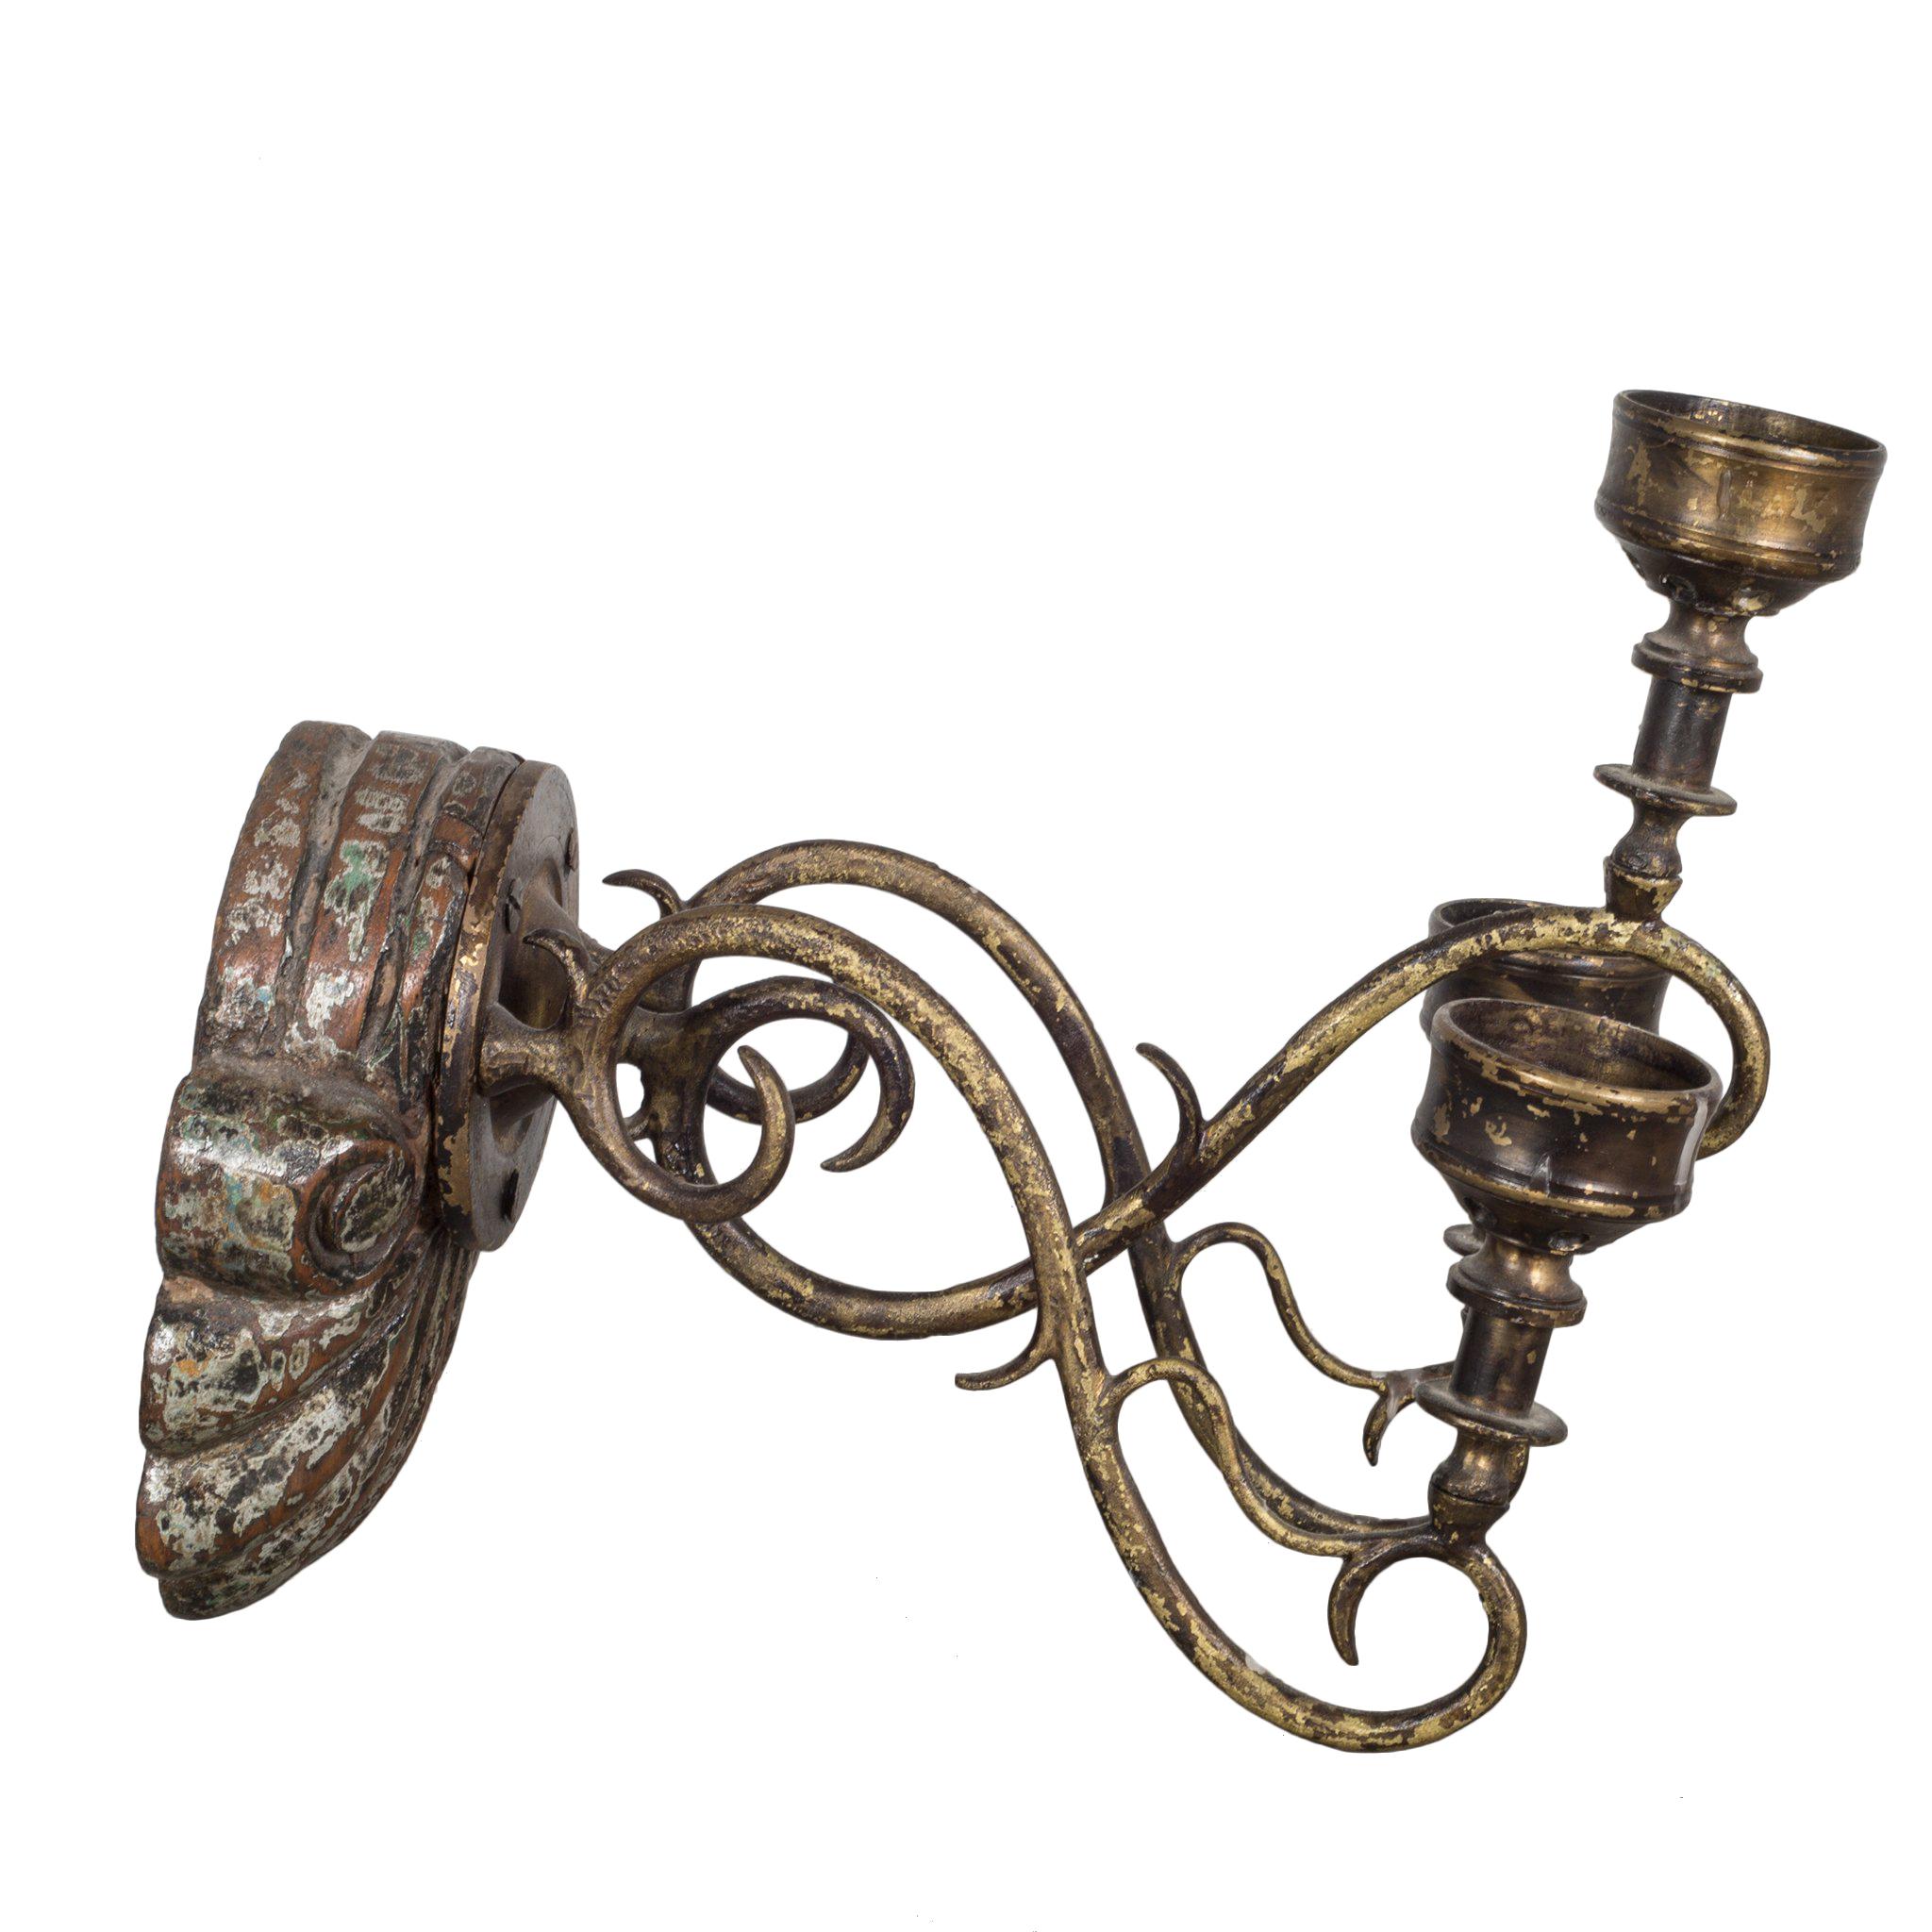 19th Century Wall Sconce Candleholders, circa 1800s